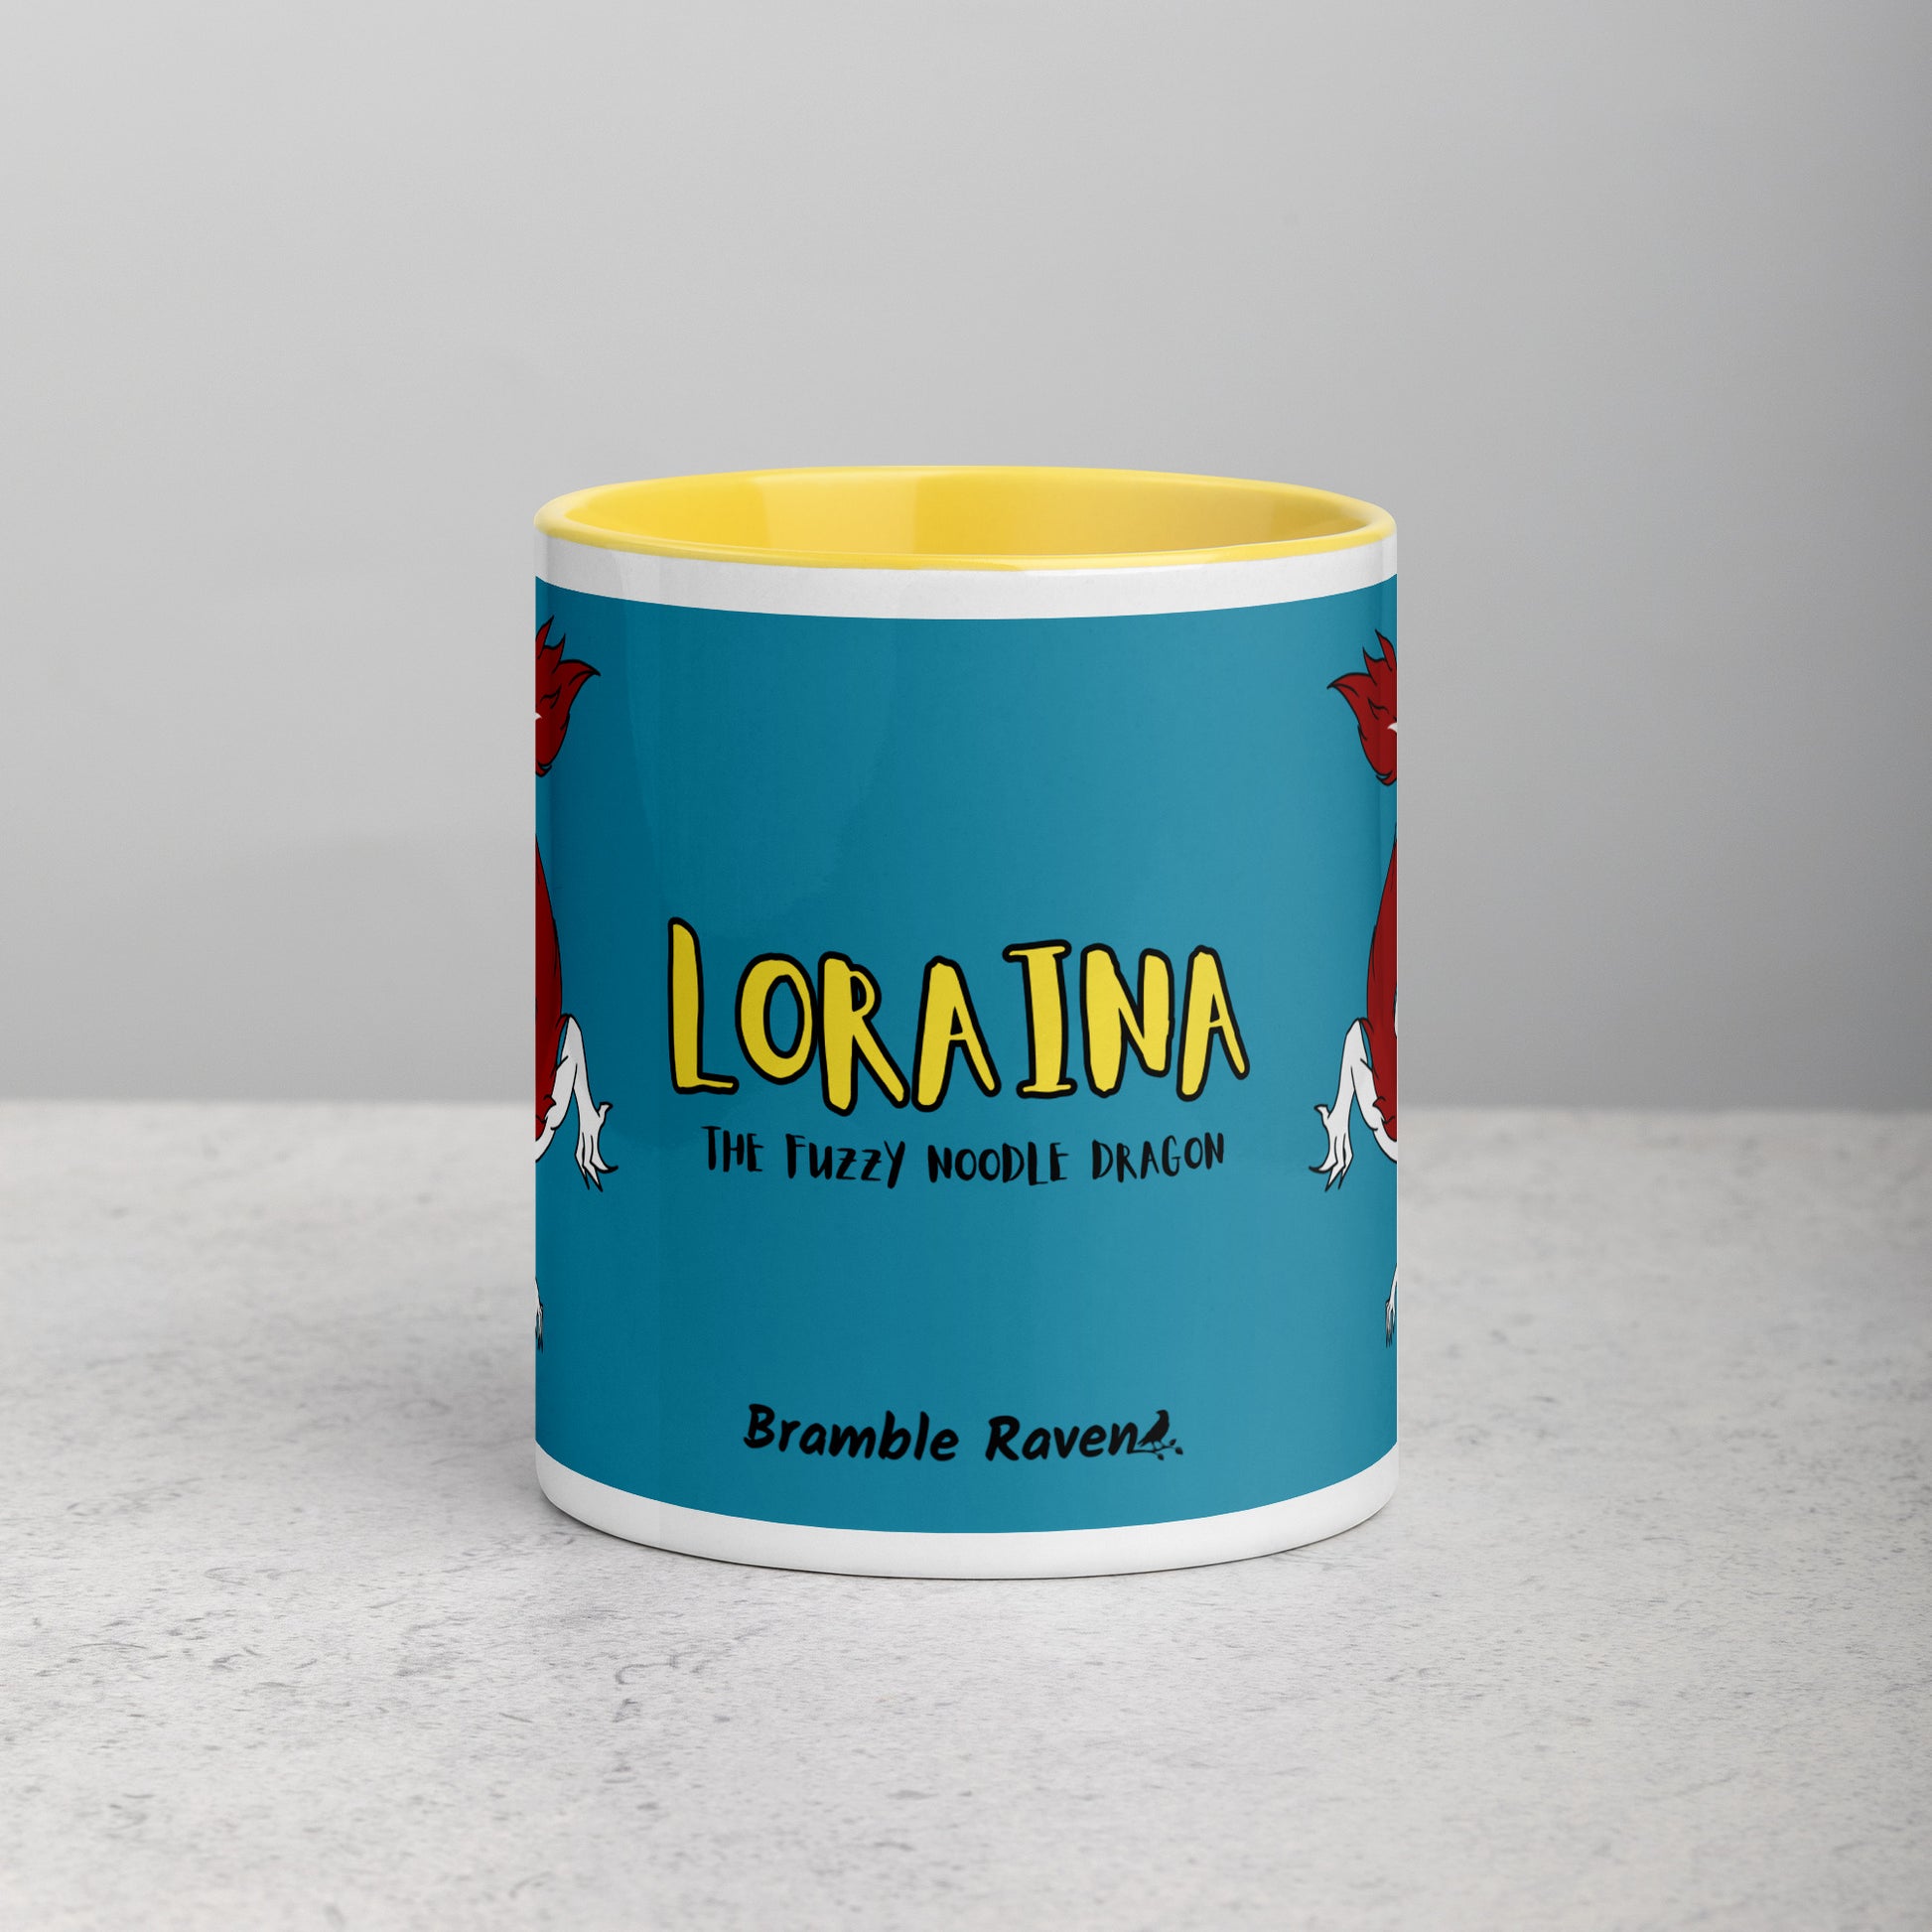 11 ounce ceramic mug with yellow handle, rim and inside color. Features double-sided image of Loraina the Fuzzy Noodle Dragon on a dark blue background. Mug is microwave and dishwasher safe. Front view shows Loraina the Fuzzy Noodle Dragon text and Bramble Raven logo.